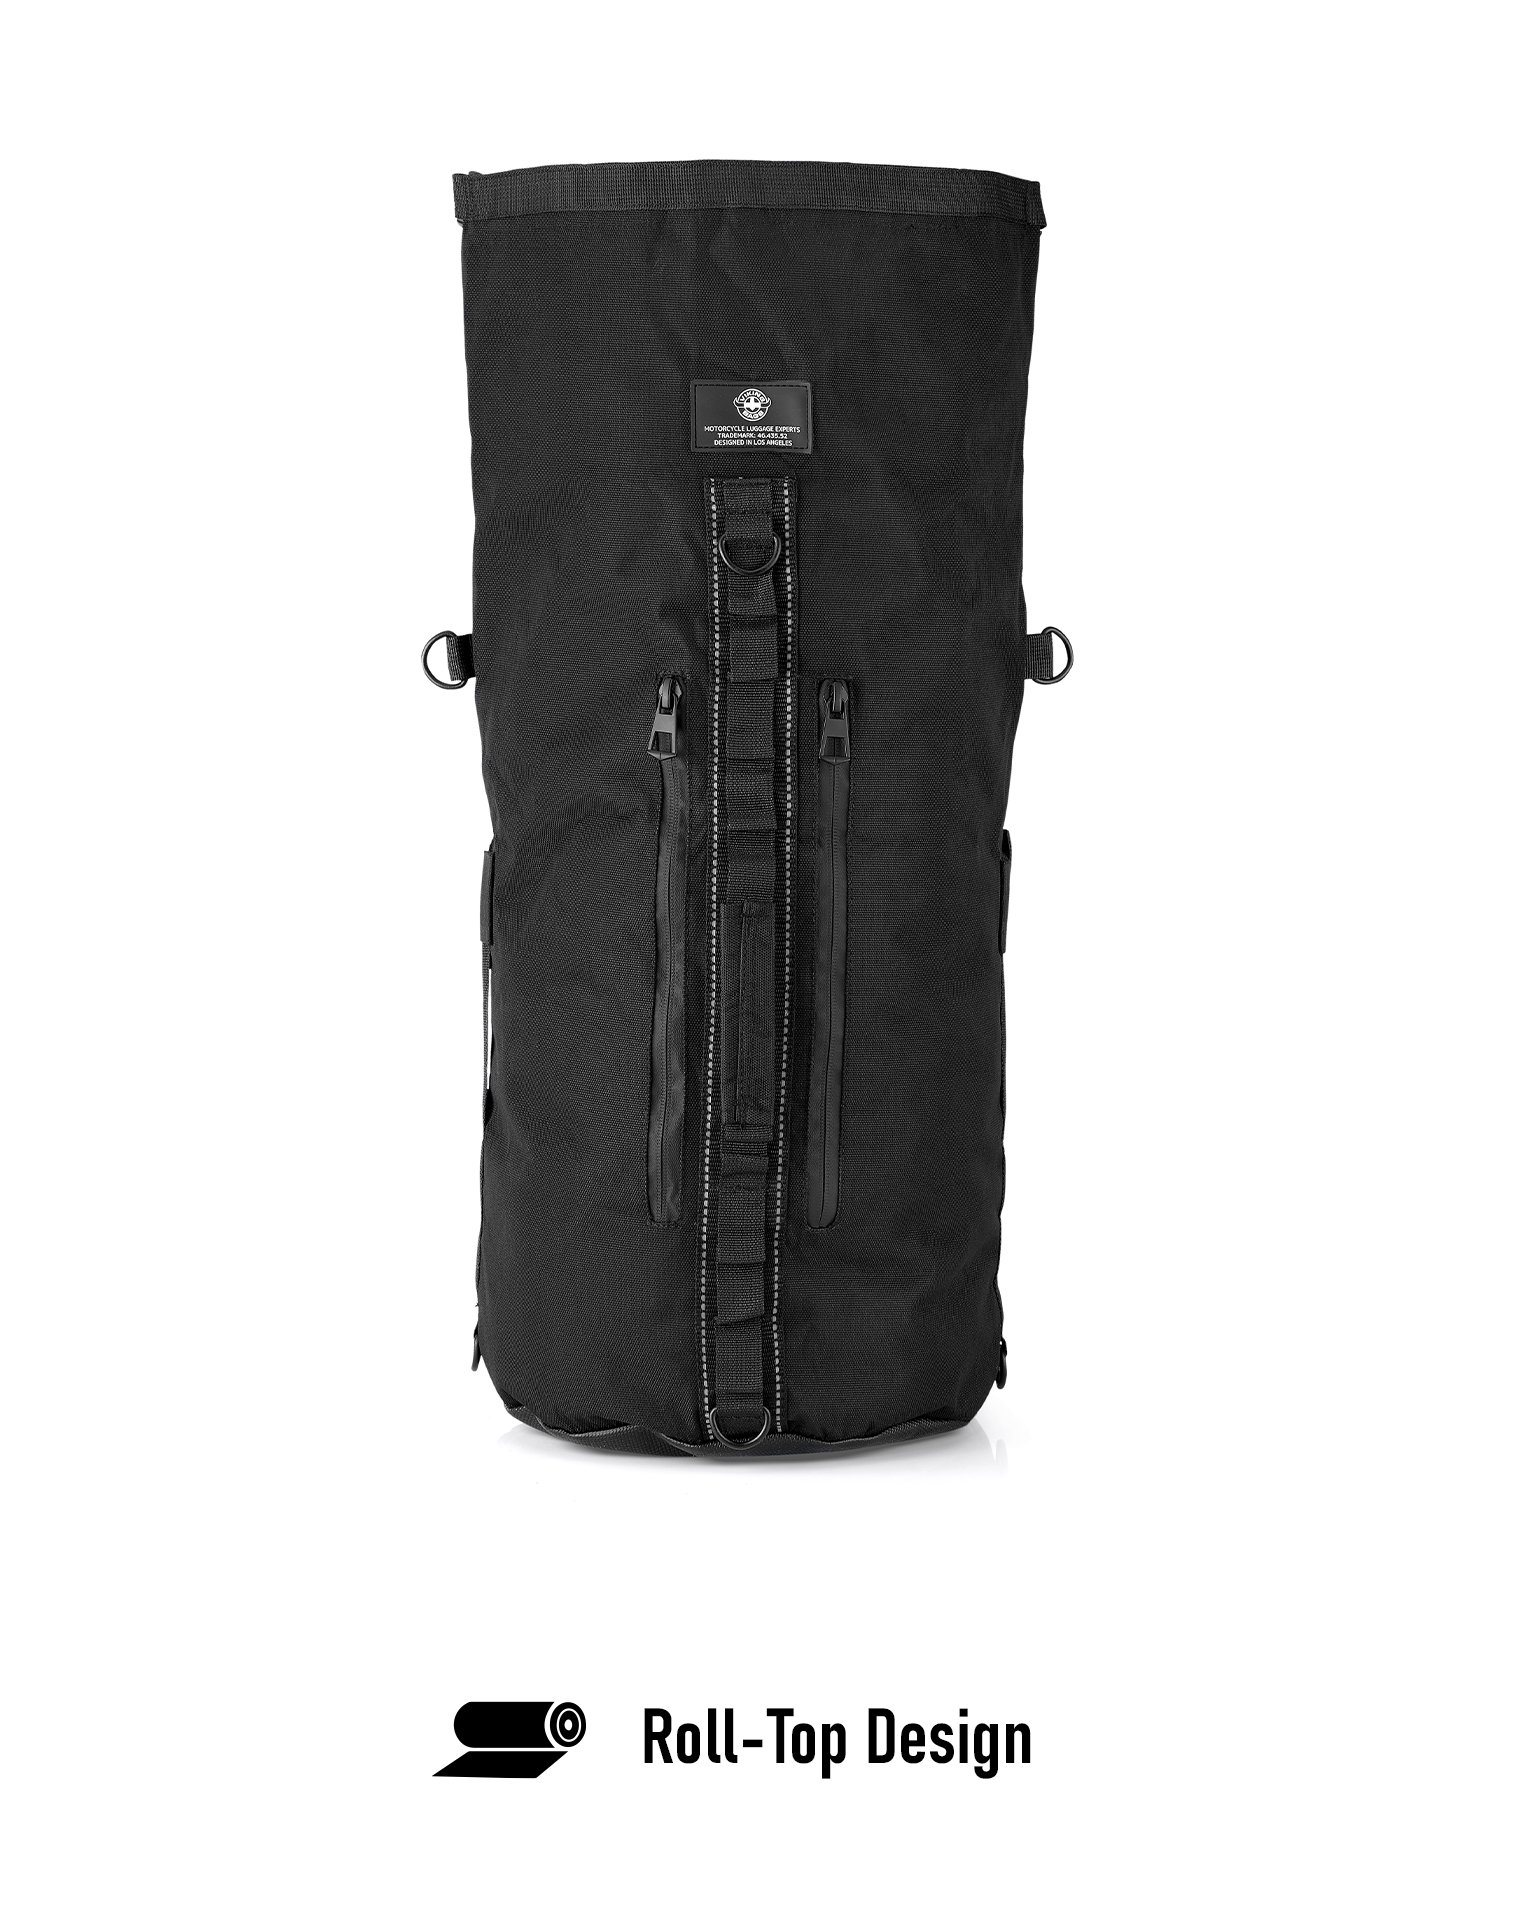 35L - Renegade XL Hyosung Motorcycle Dry Backpack